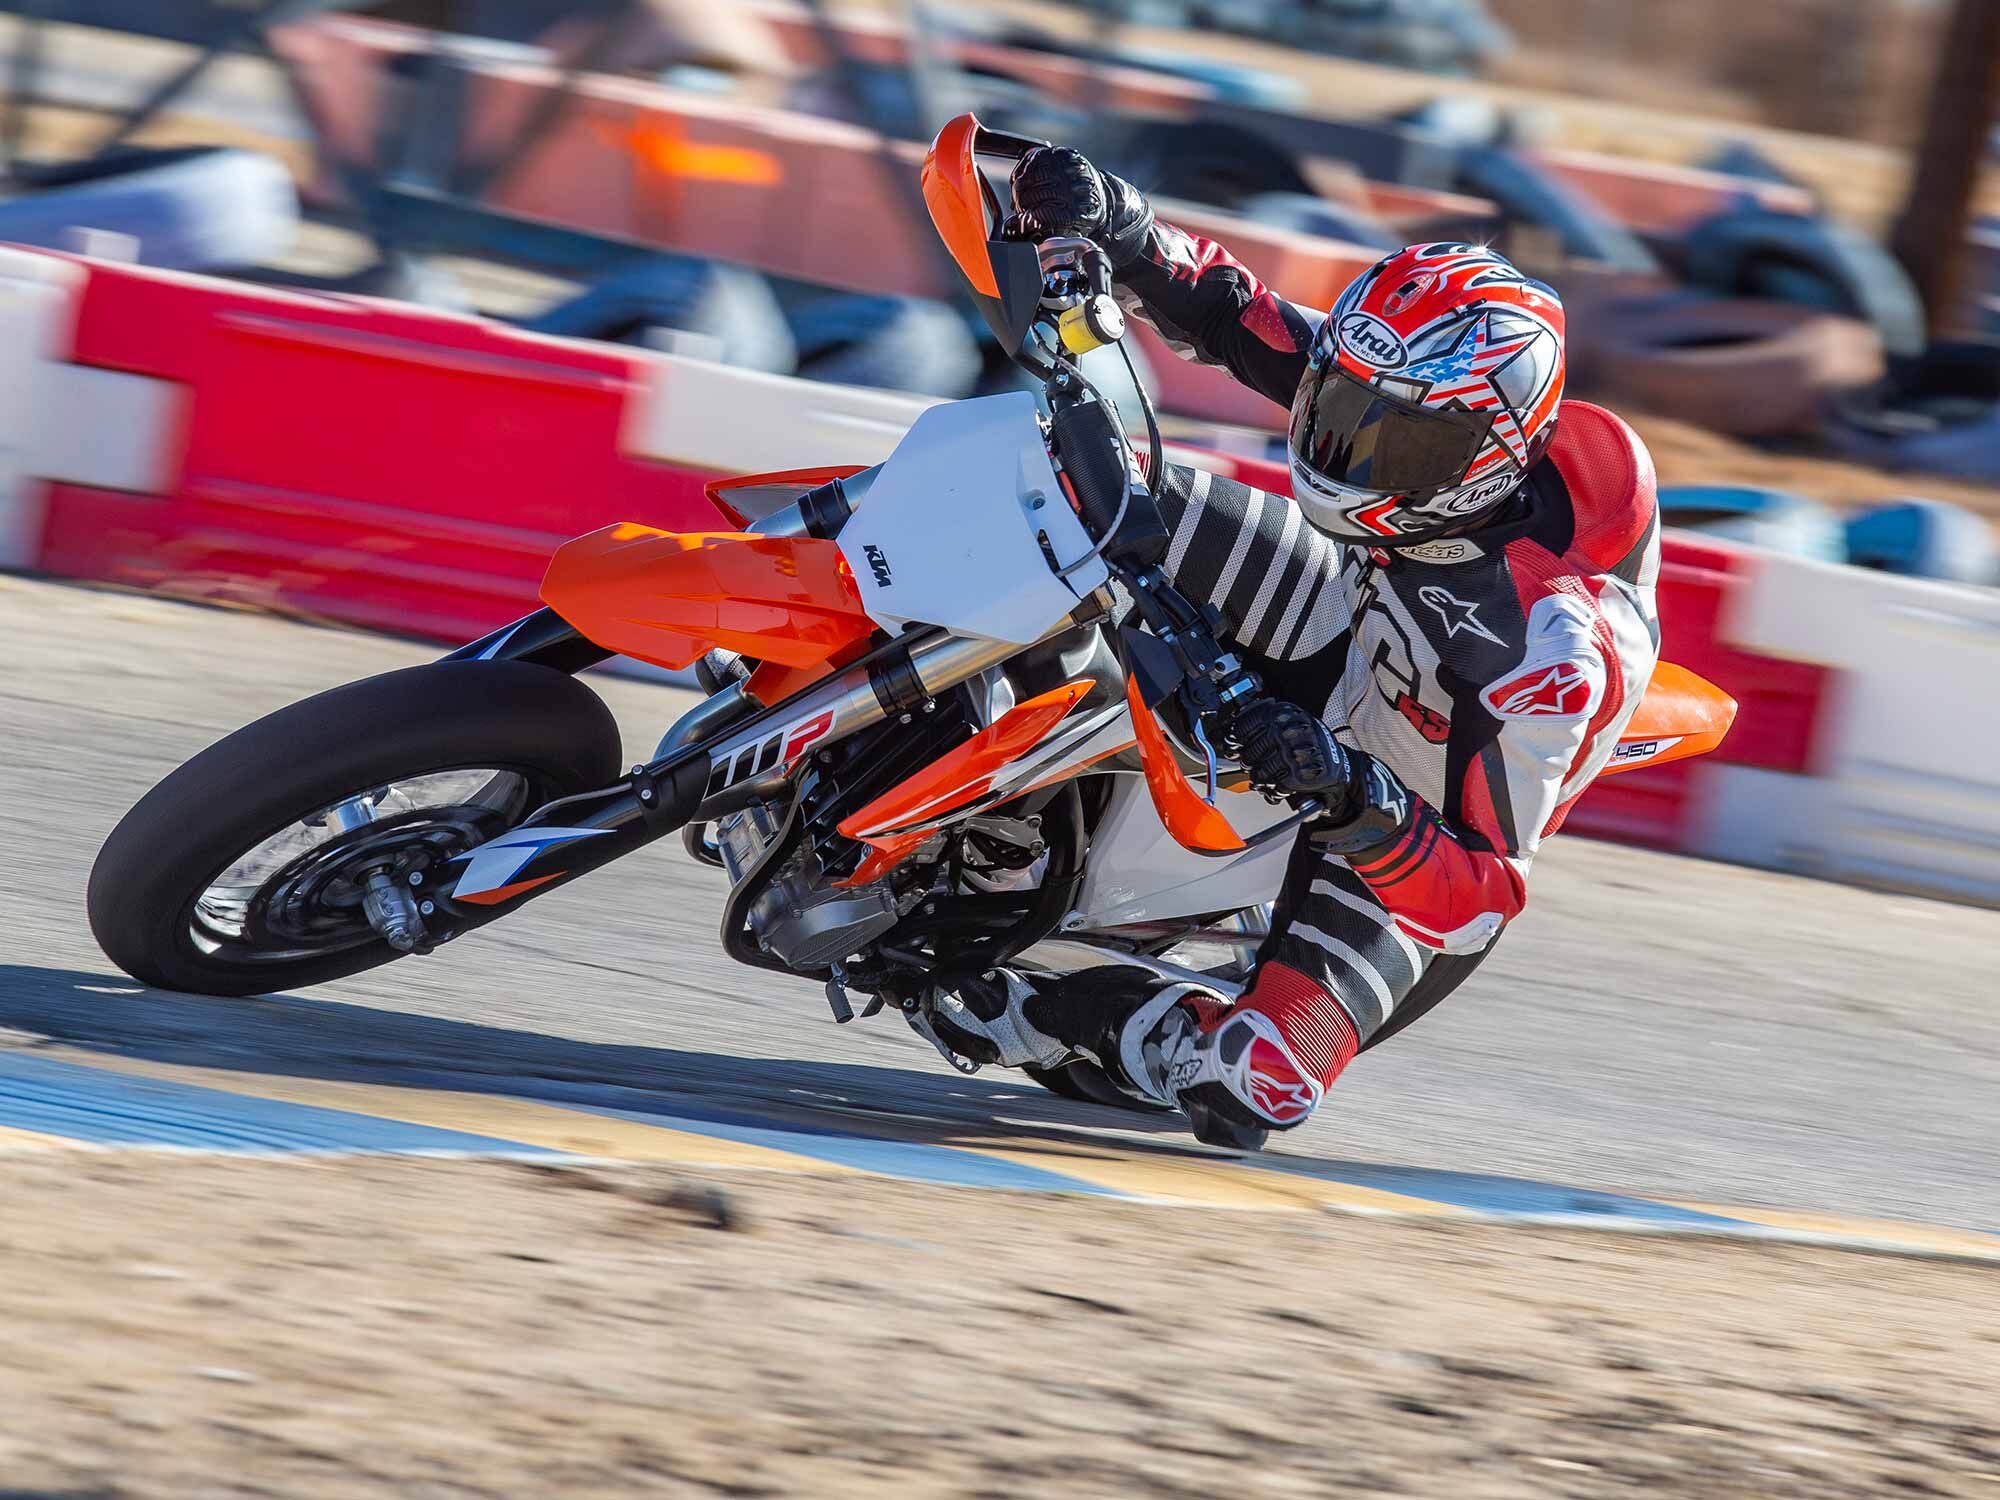 If you want to ride your motorcycle anywhere near its performance limit, head to a trackday where you can practice in a safe and controlled environment.